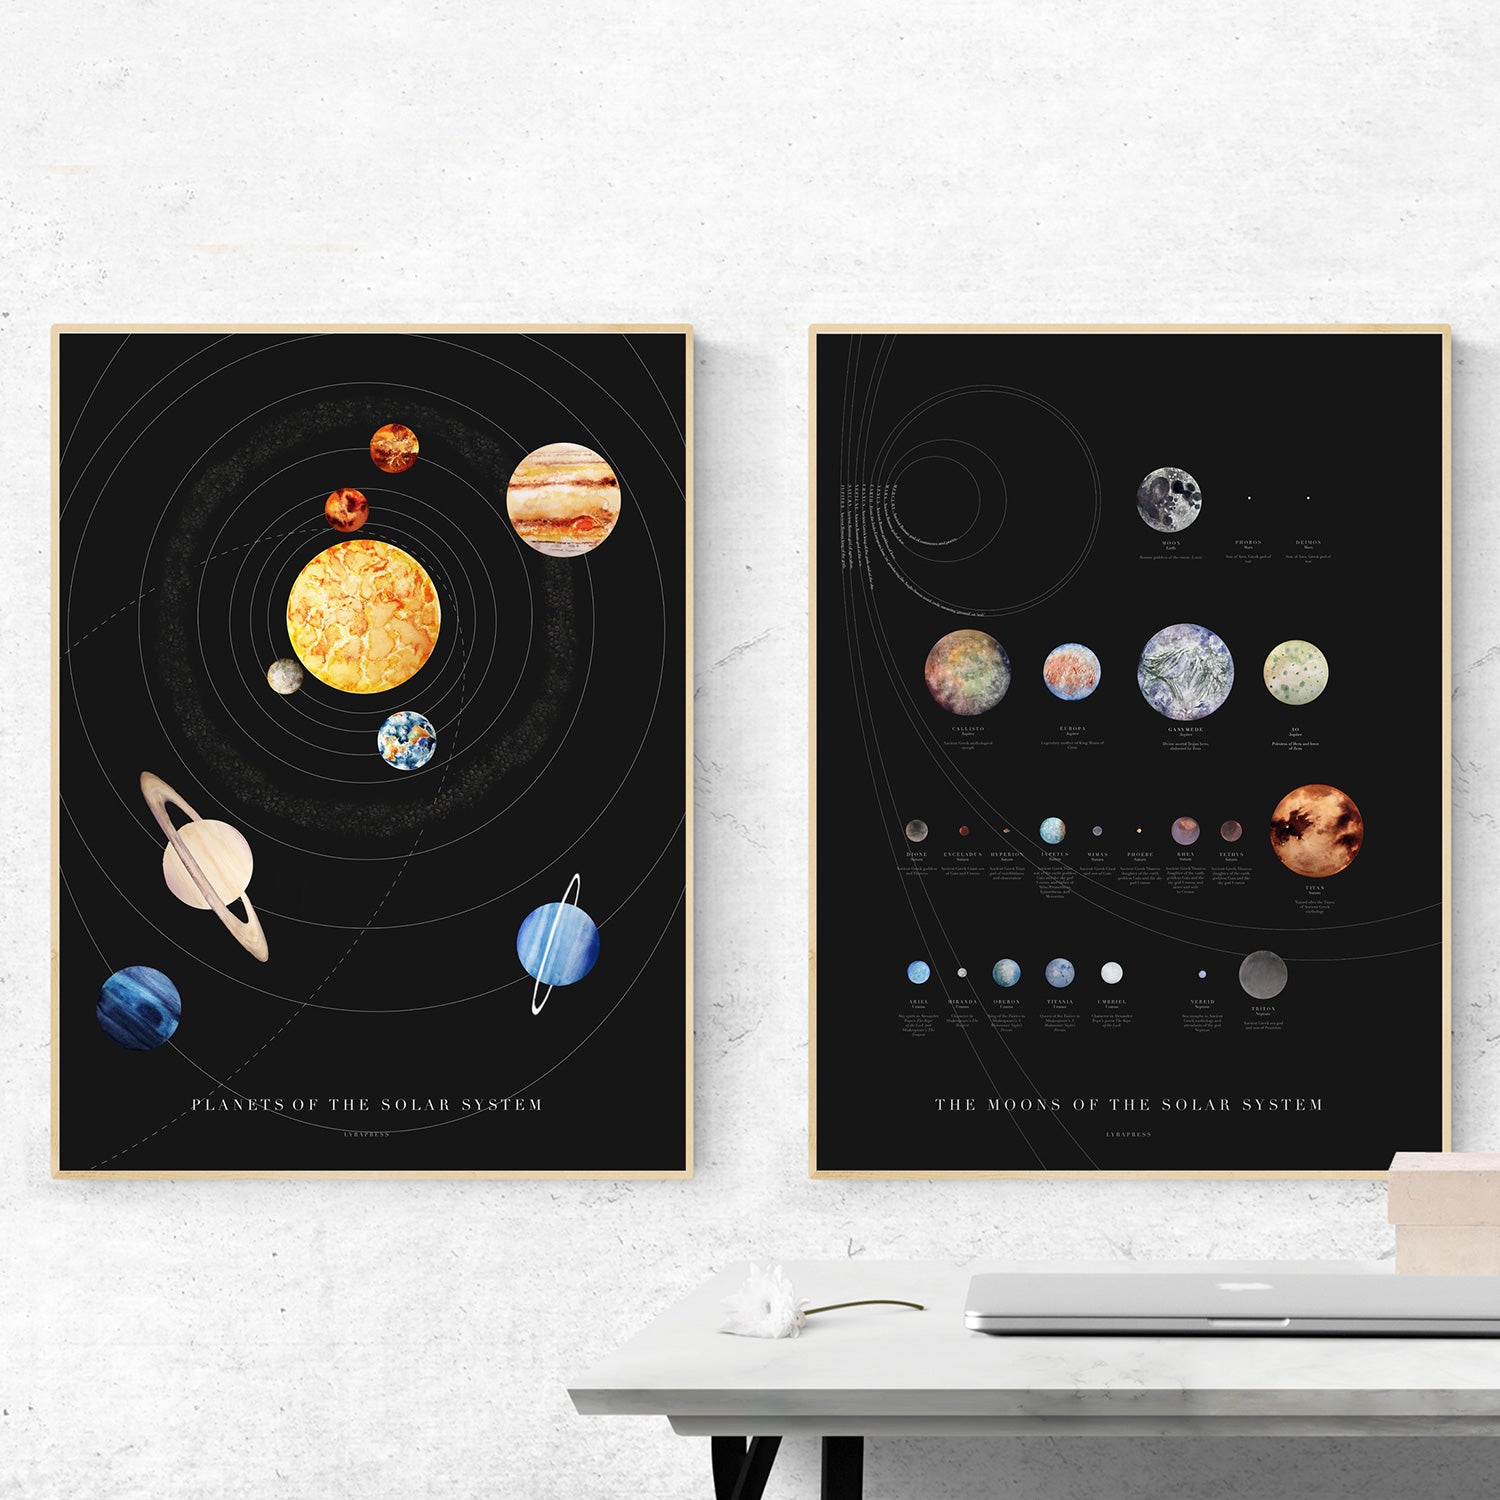 printable planets and their moons